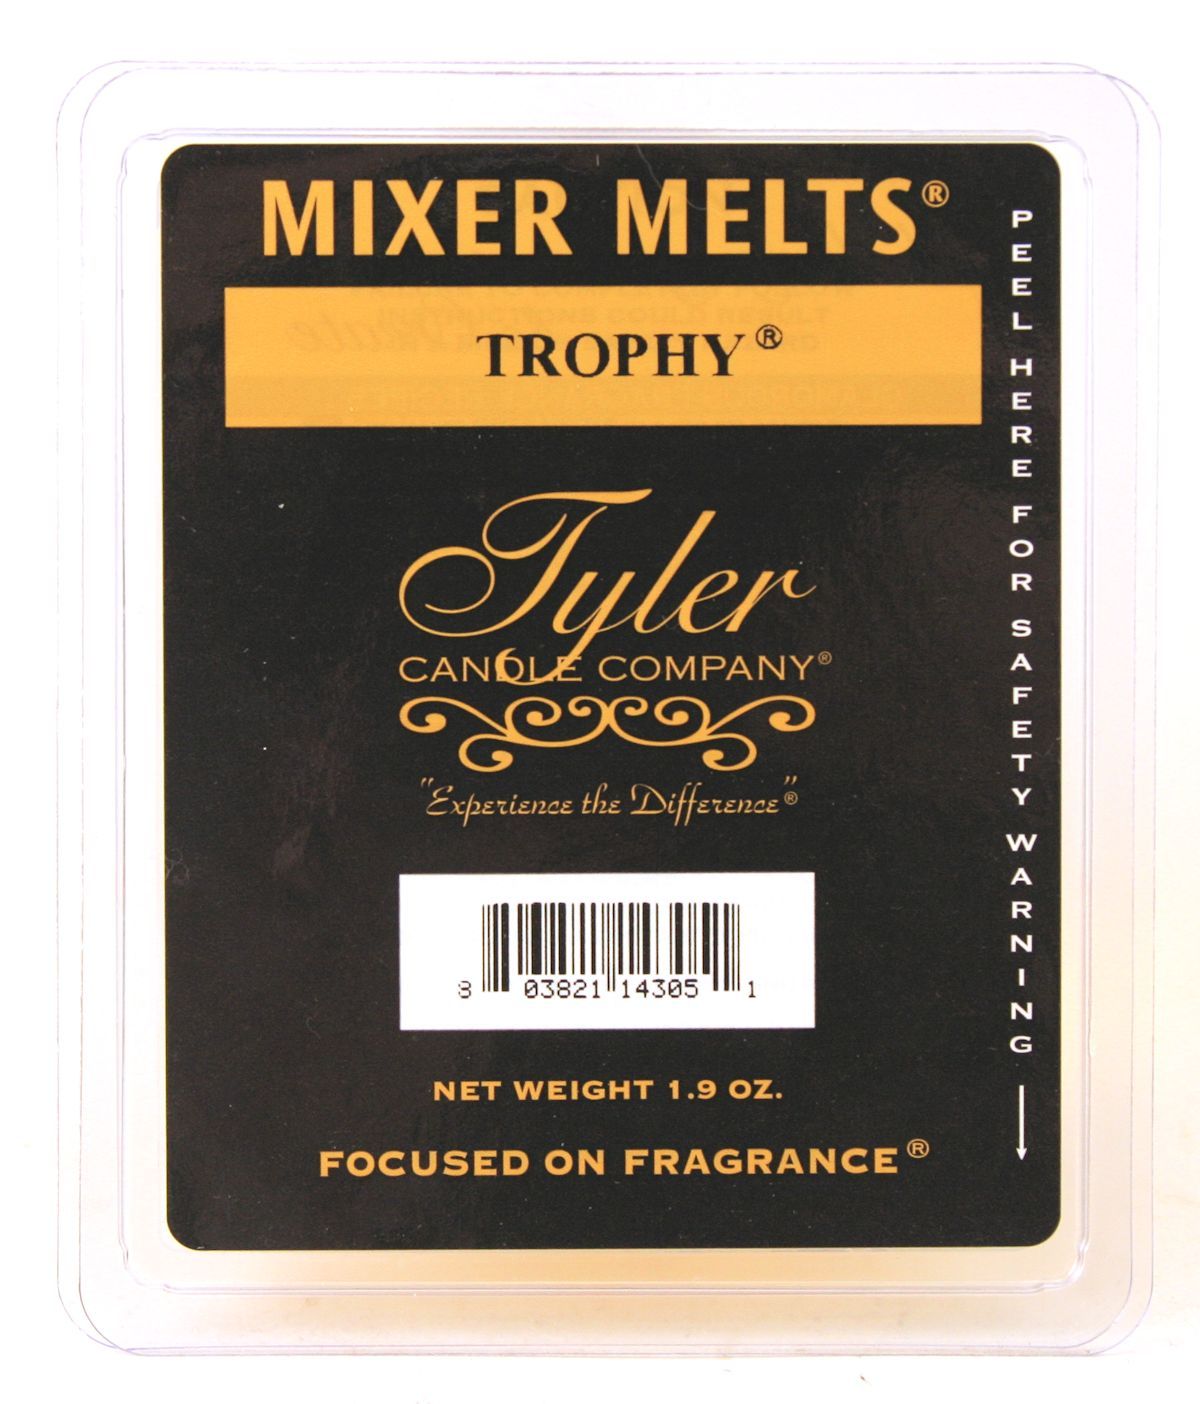 TROPHY Fragrance Scented Wax Mixer Melts by Tyler Candles